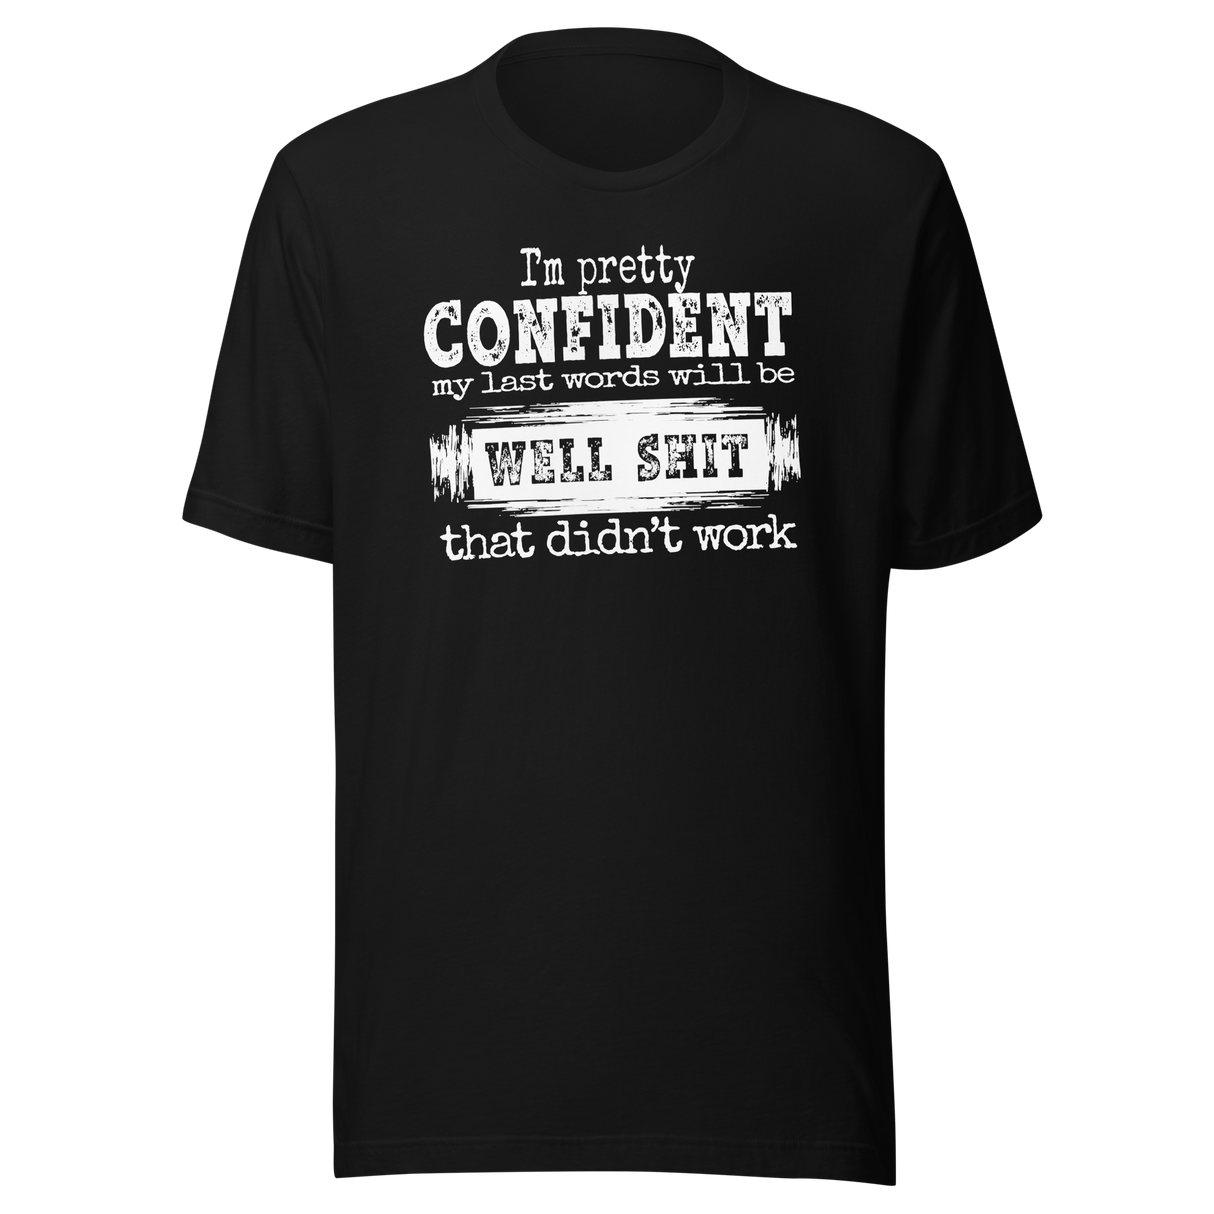 im-pretty-confident-my-last-words-will-be-well-shit-that-didnt-work-life-tee-funny-t-shirt-life-tee-humor-t-shirt-confidence-tee#color_black